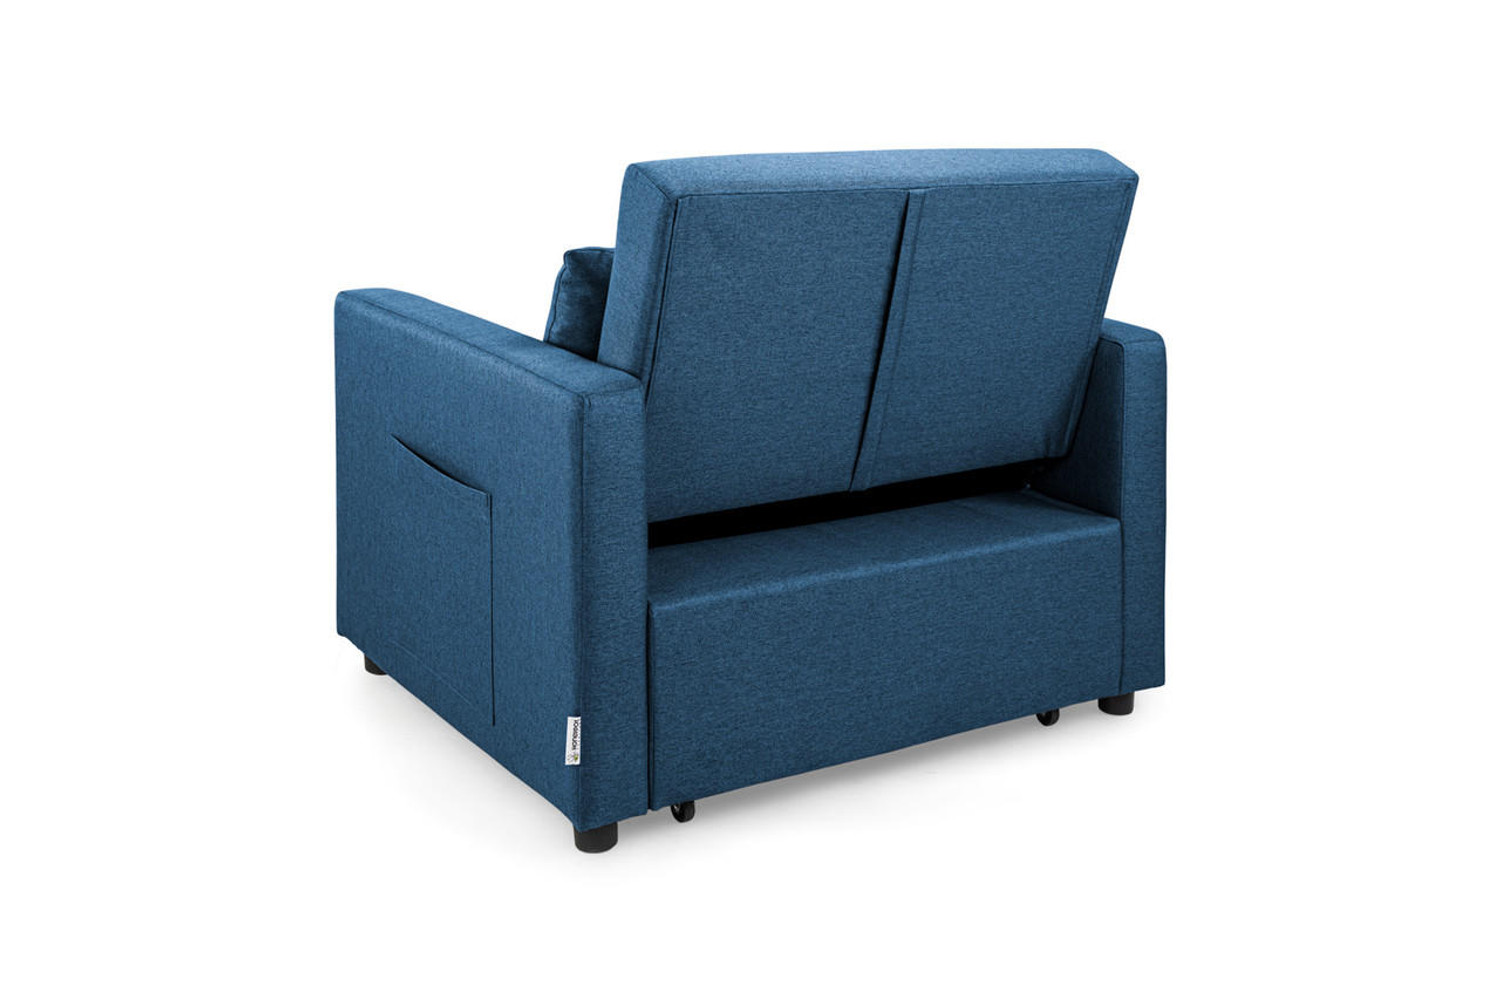 Honeypot Furniture Aria Sofabed Teal Armchair 